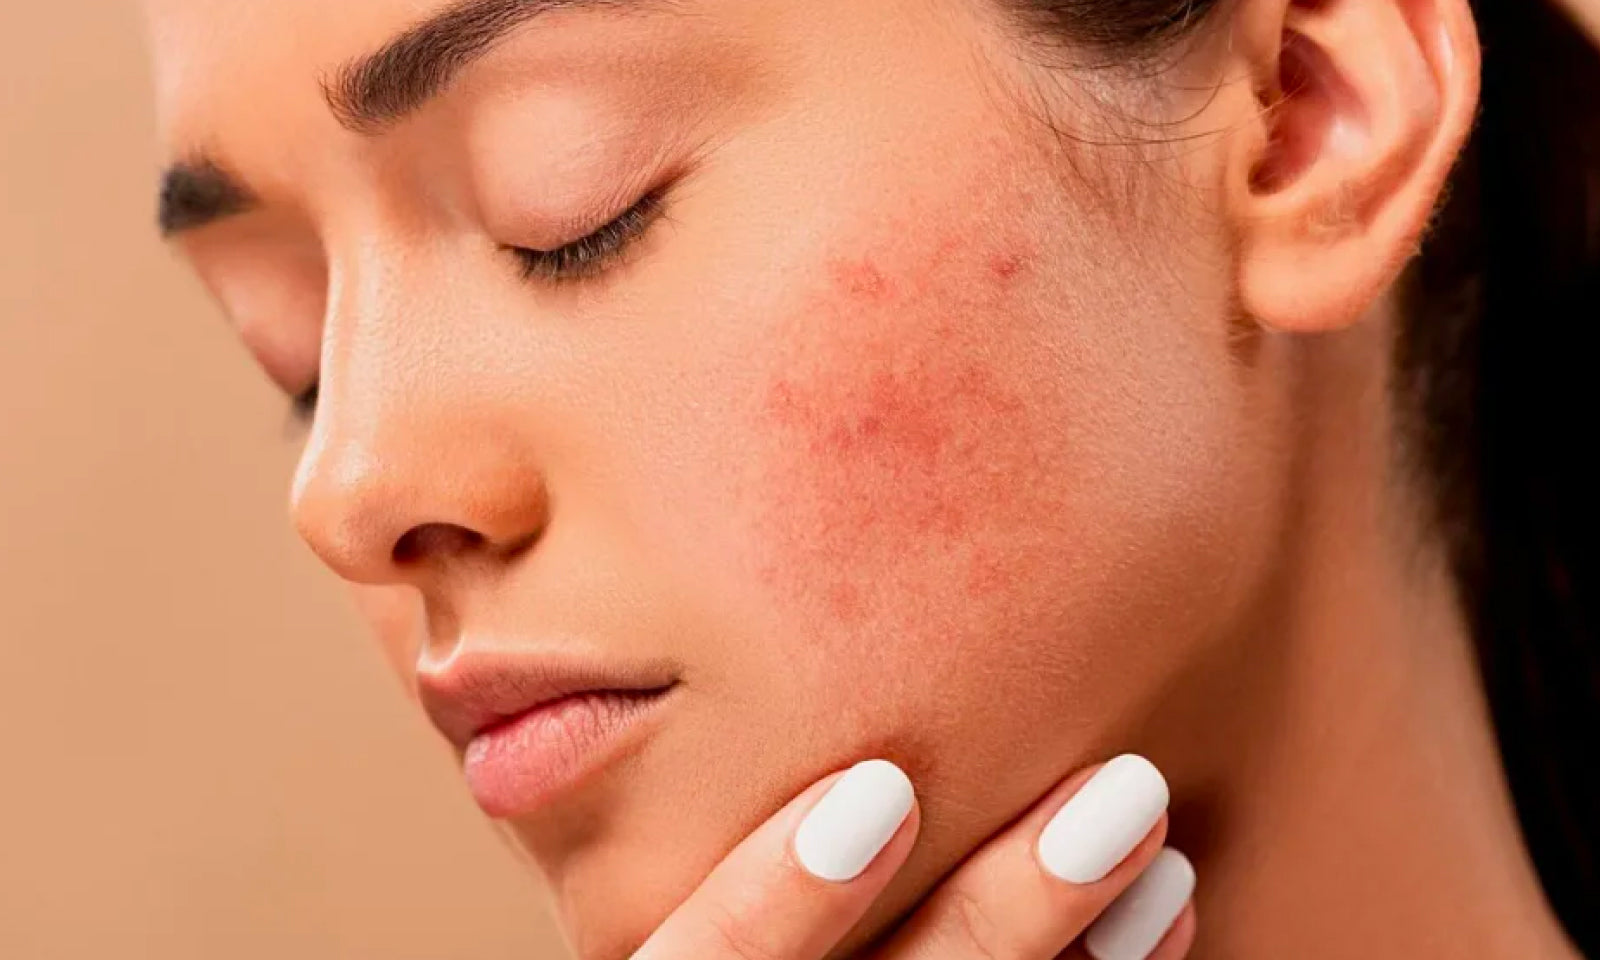 Acne During Your Period? Causes and What You Can Do